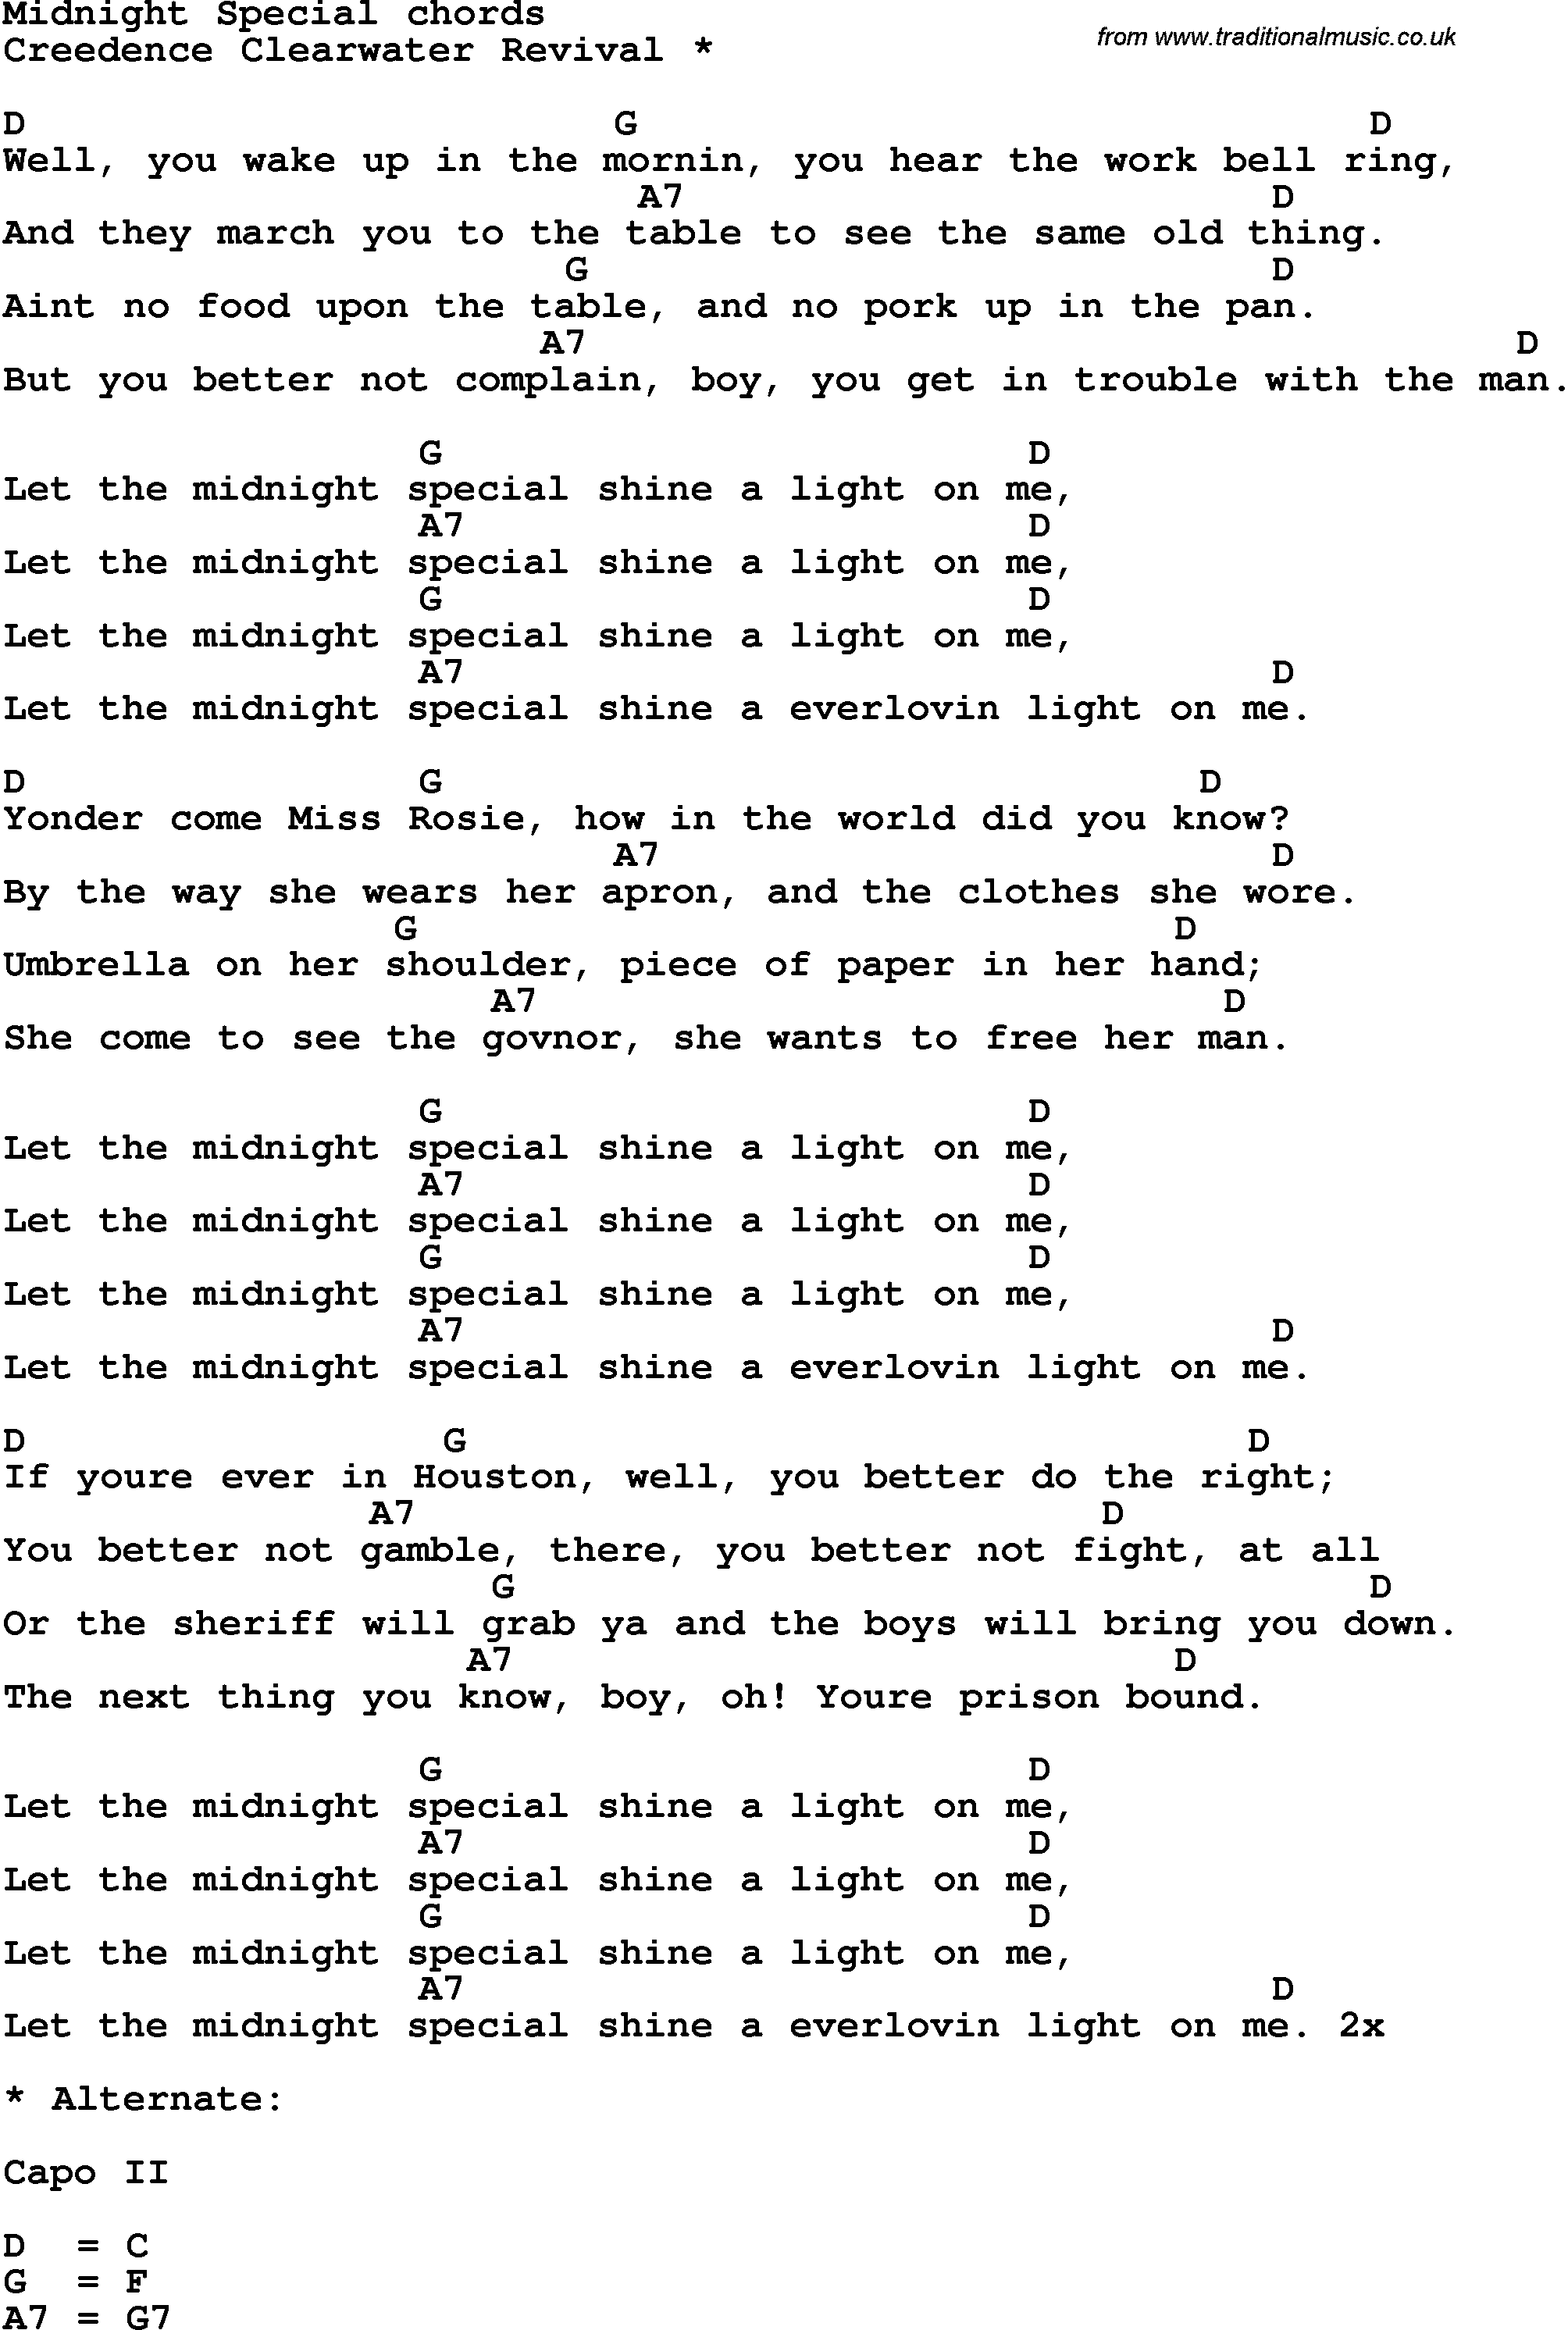 Song Lyrics with guitar chords for Midnight Special